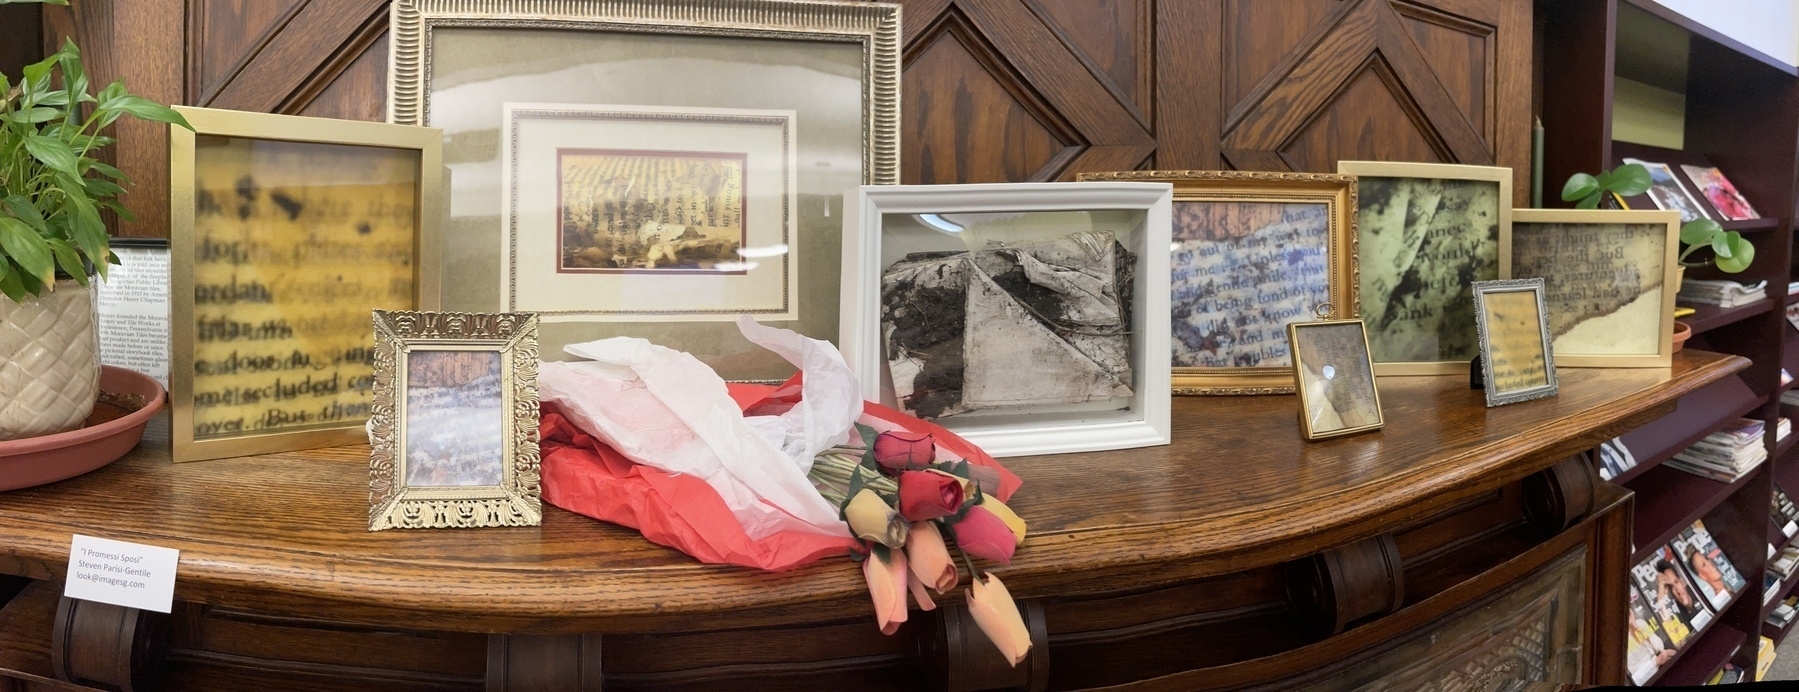 Framed images of a discarded book and roses made paper made from the pages of a discarded book on a fireplace mantle.